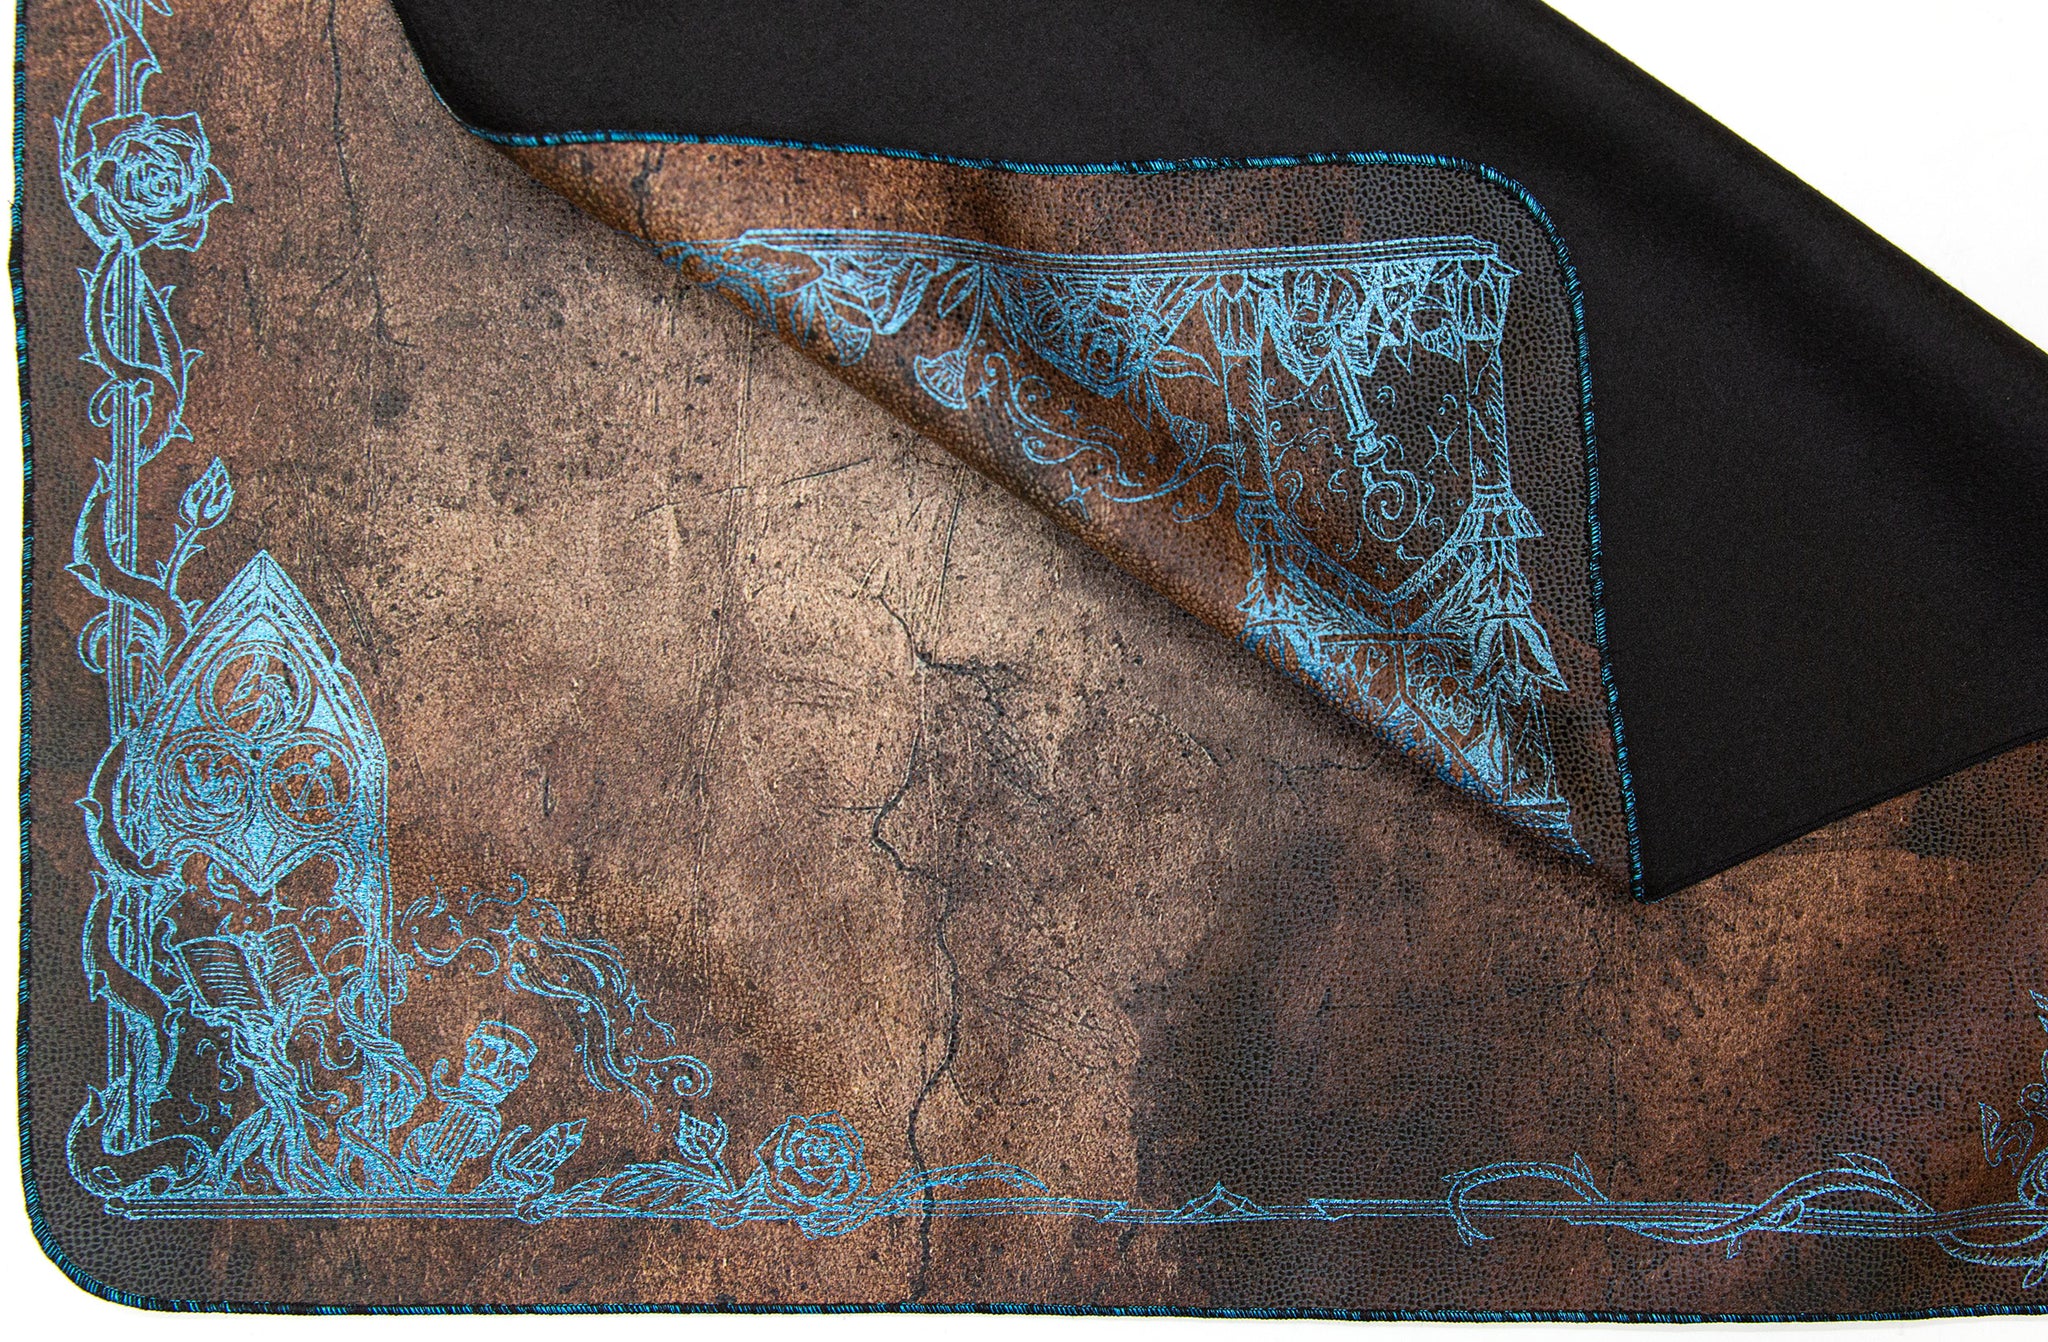 The Collab | Artisan Hybrid on Pvremium Dragonskin x Tome of the Undying *RESERVE STOCK*